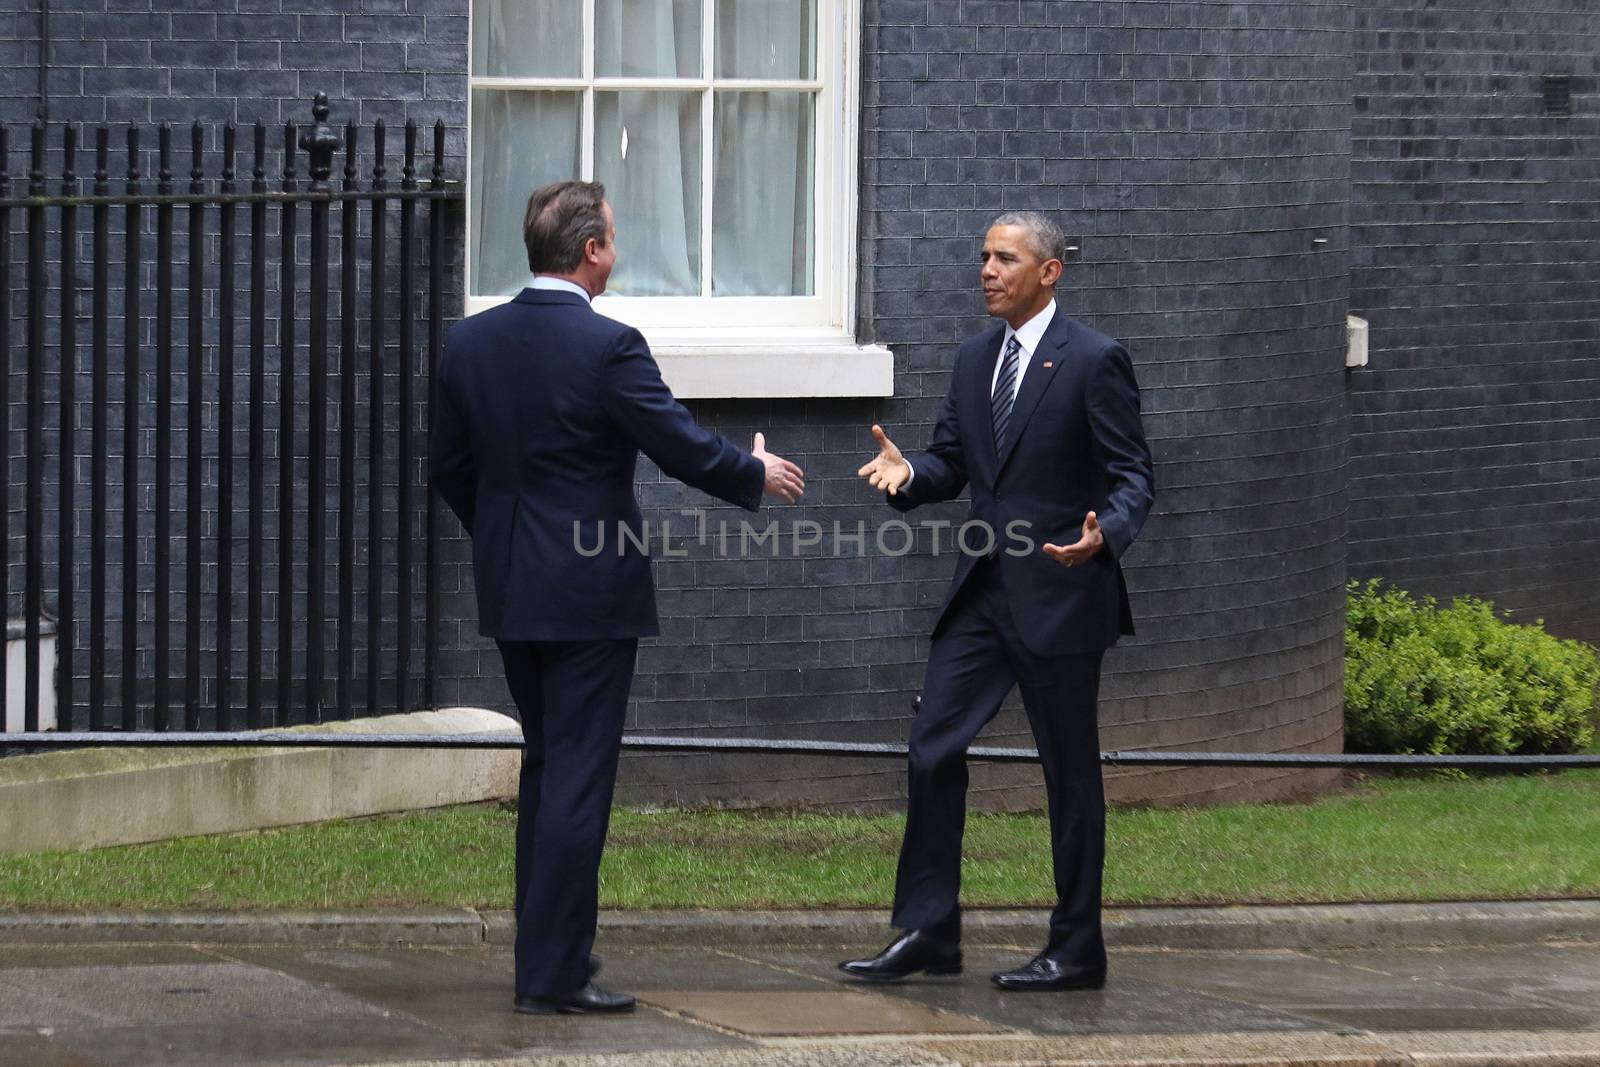 UNITED-KINGDOM, London: President Barack Obama (R) greets British Prime Minister David Cameron (L) as they meet at Downing Street on April 22, 2016 in London, United-Kingdom. The President and his wife are currently on a brief visit to the UK where they will have lunch with HM Queen Elizabeth II at Windsor Castle and dinner with Prince William and his wife Catherine, Duchess of Cambridge at Kensington Palace. 